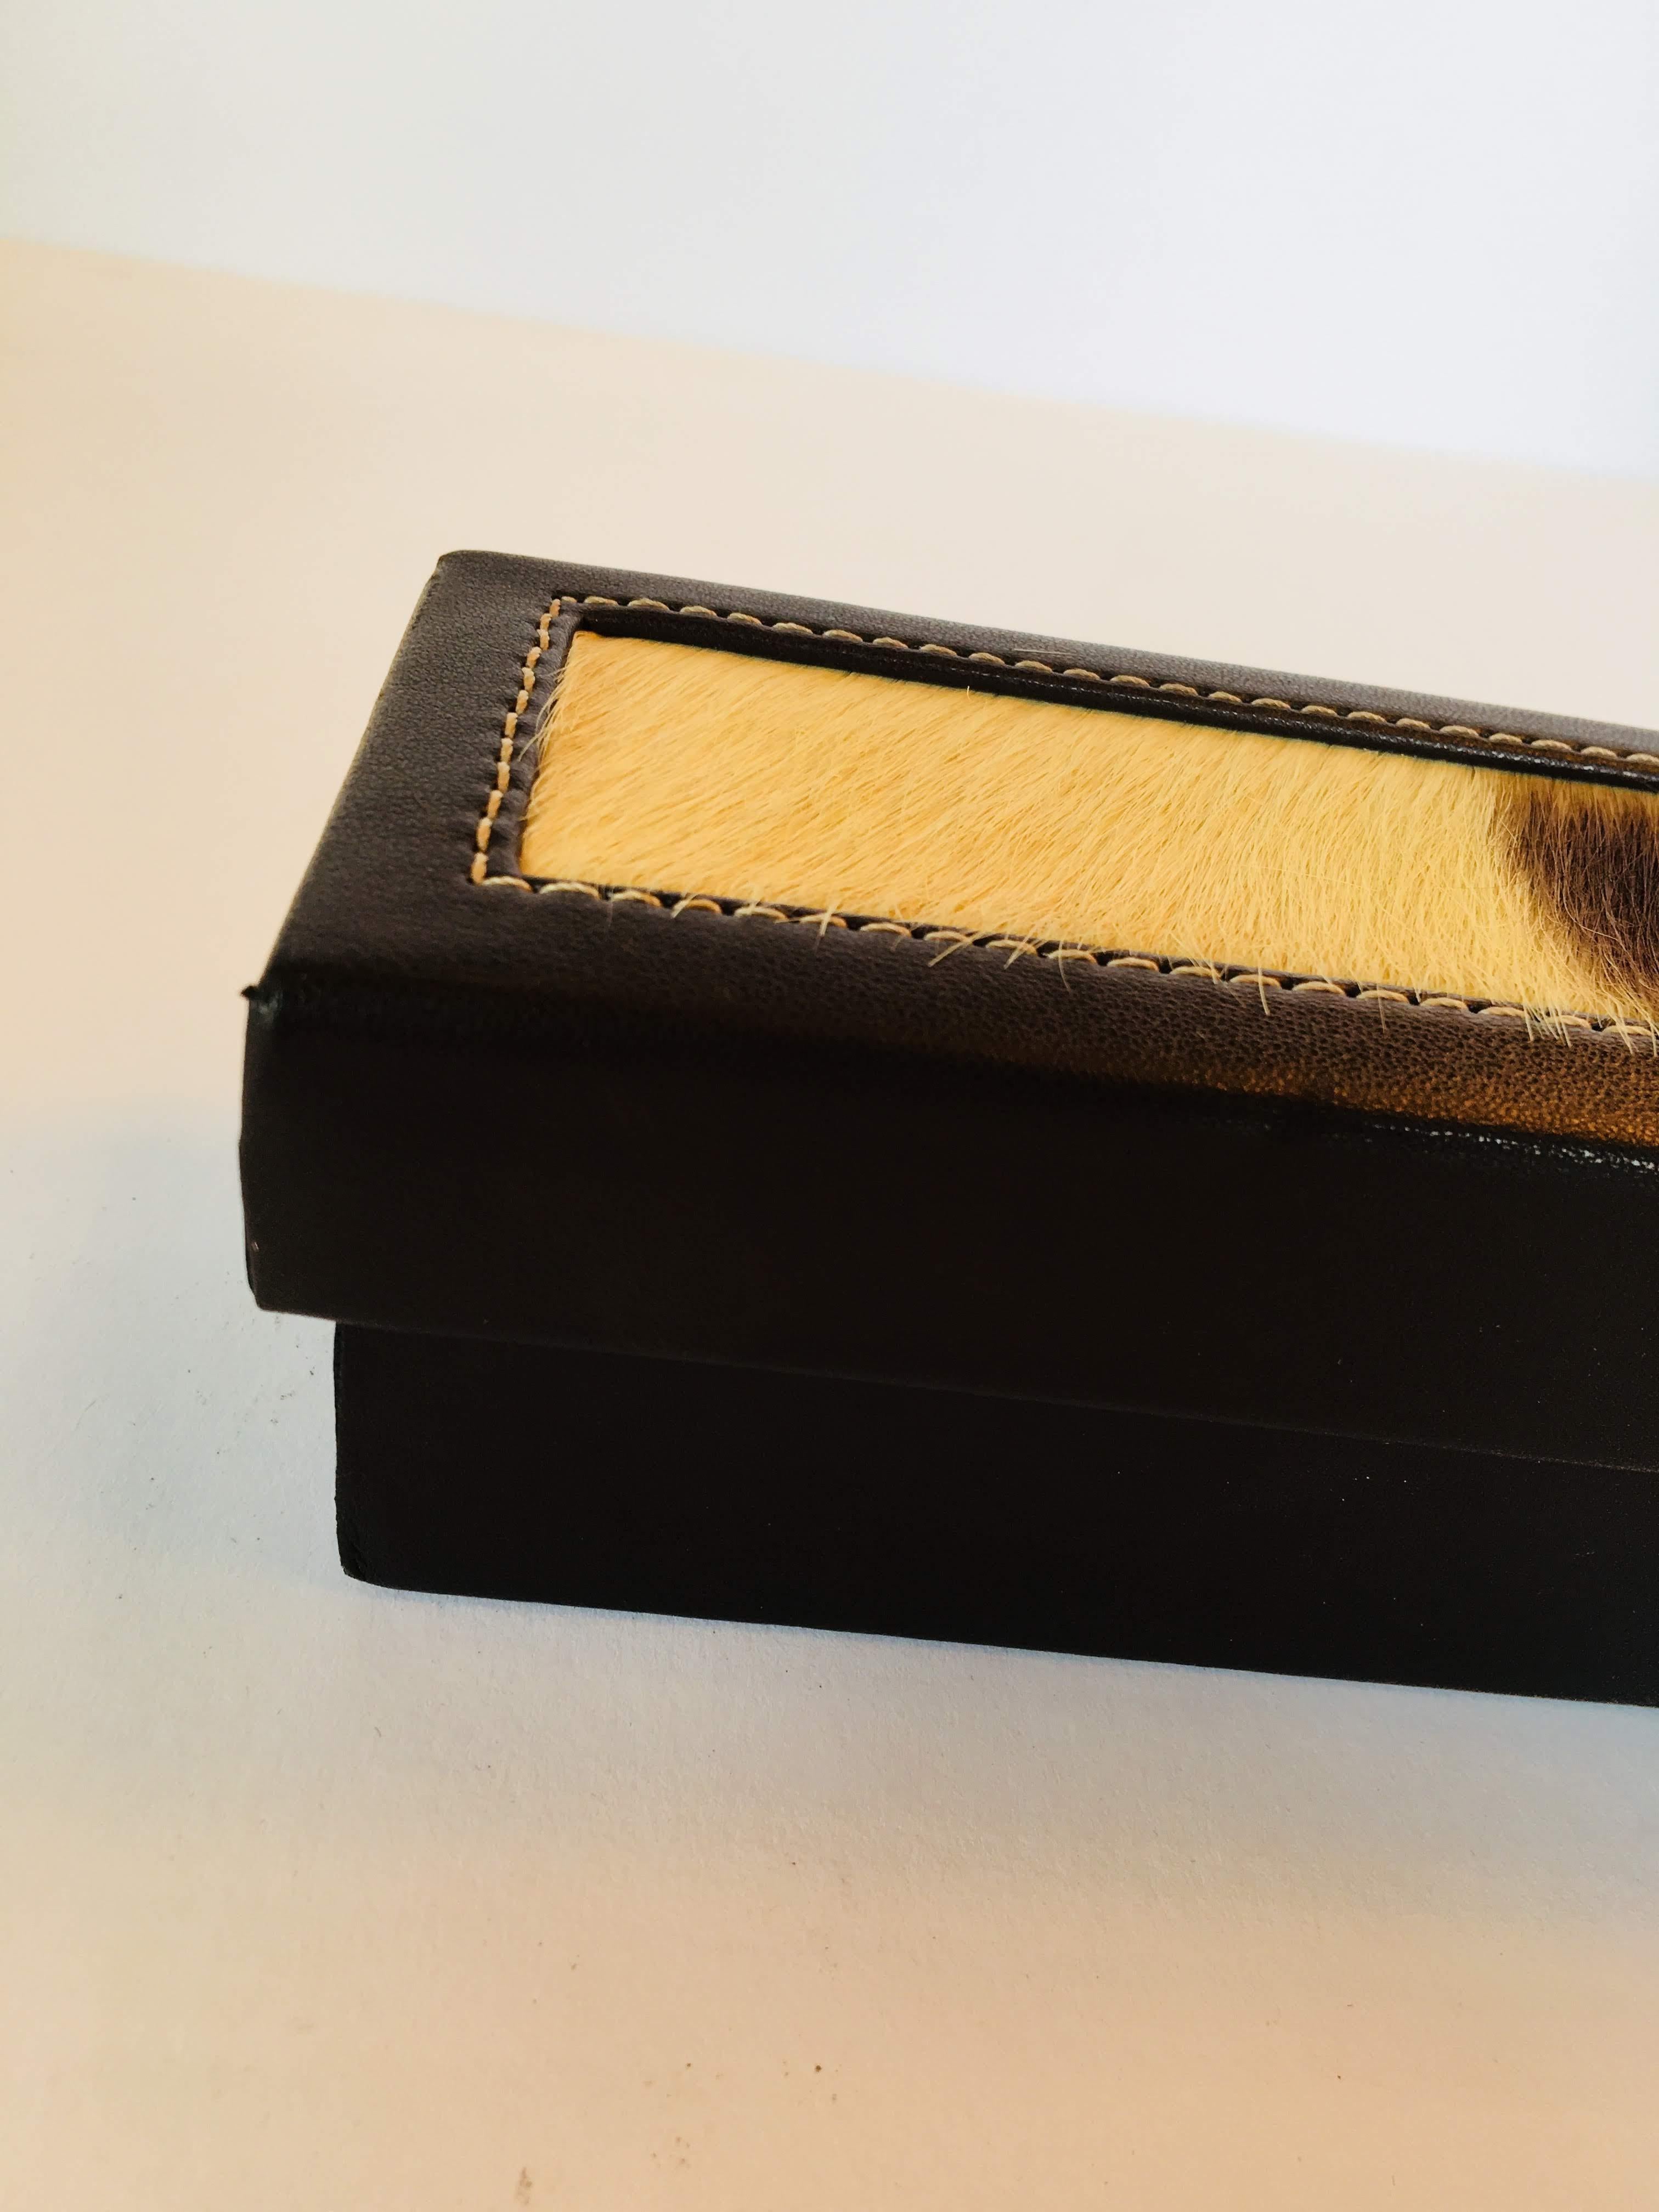 Rectangular leather African box with lid and animal hair.